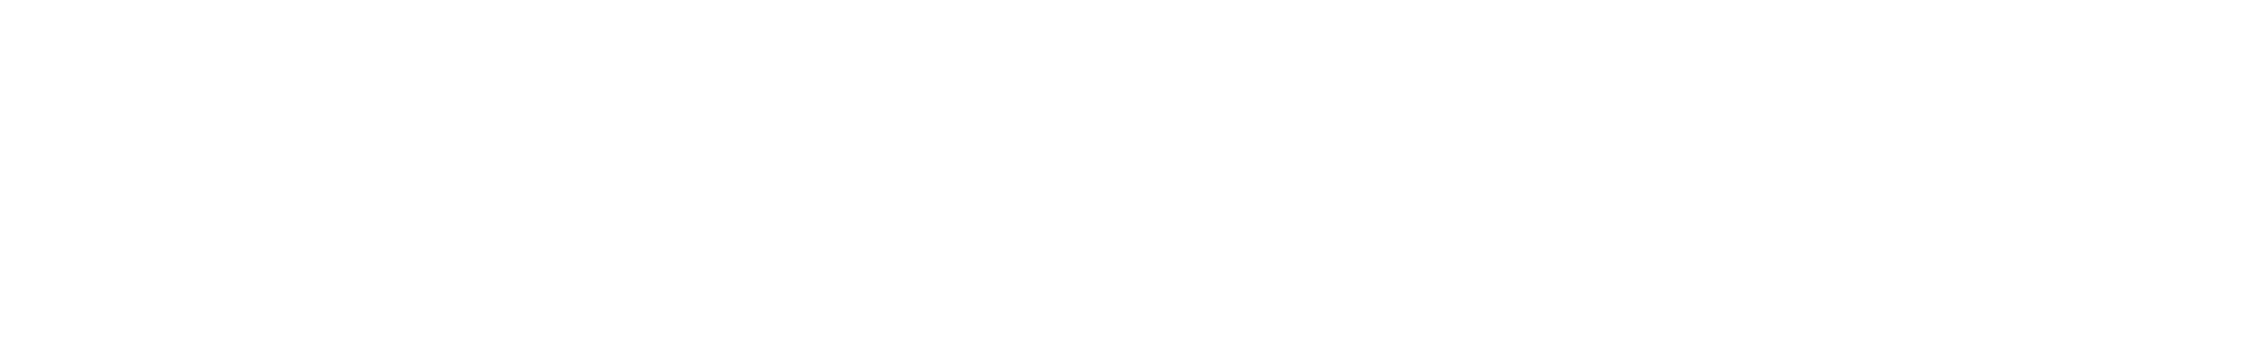 Queen Mary Students Union logo